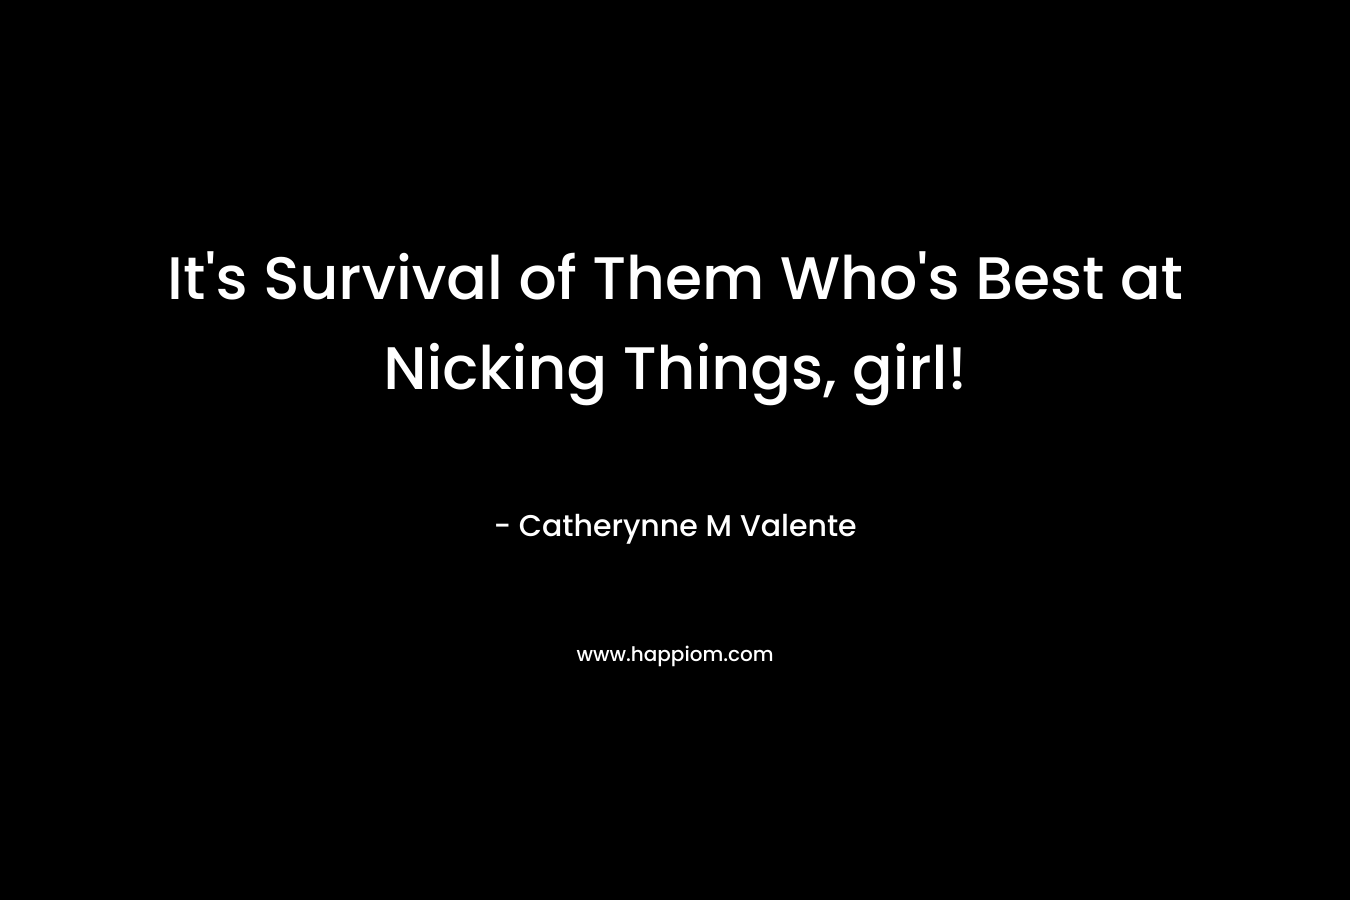 It's Survival of Them Who's Best at Nicking Things, girl!